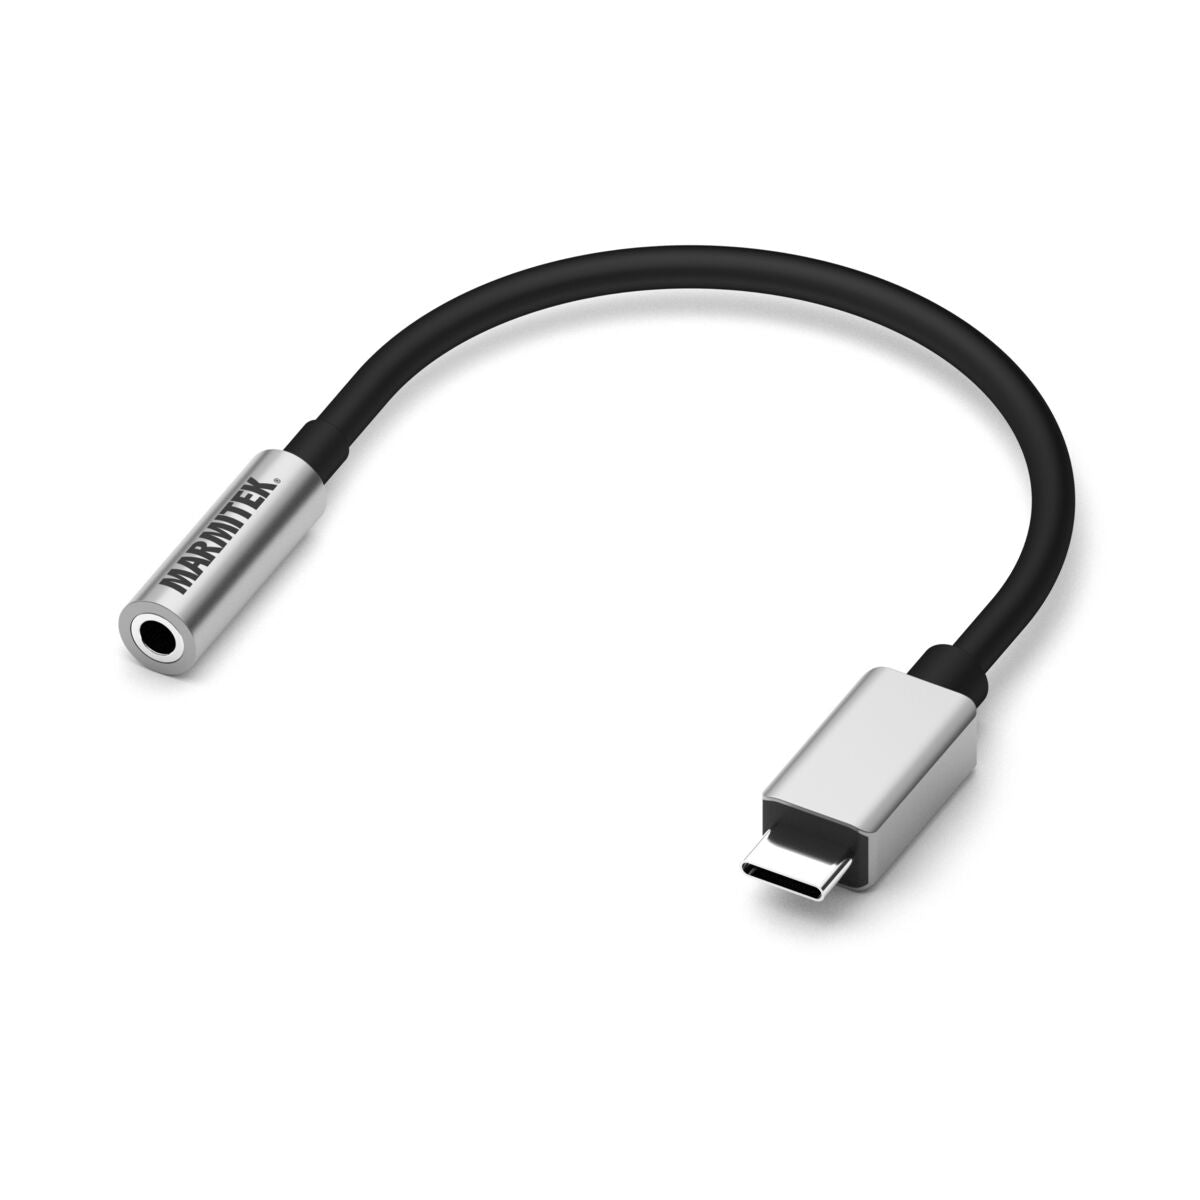 Buy USB-C to AUX adapter?